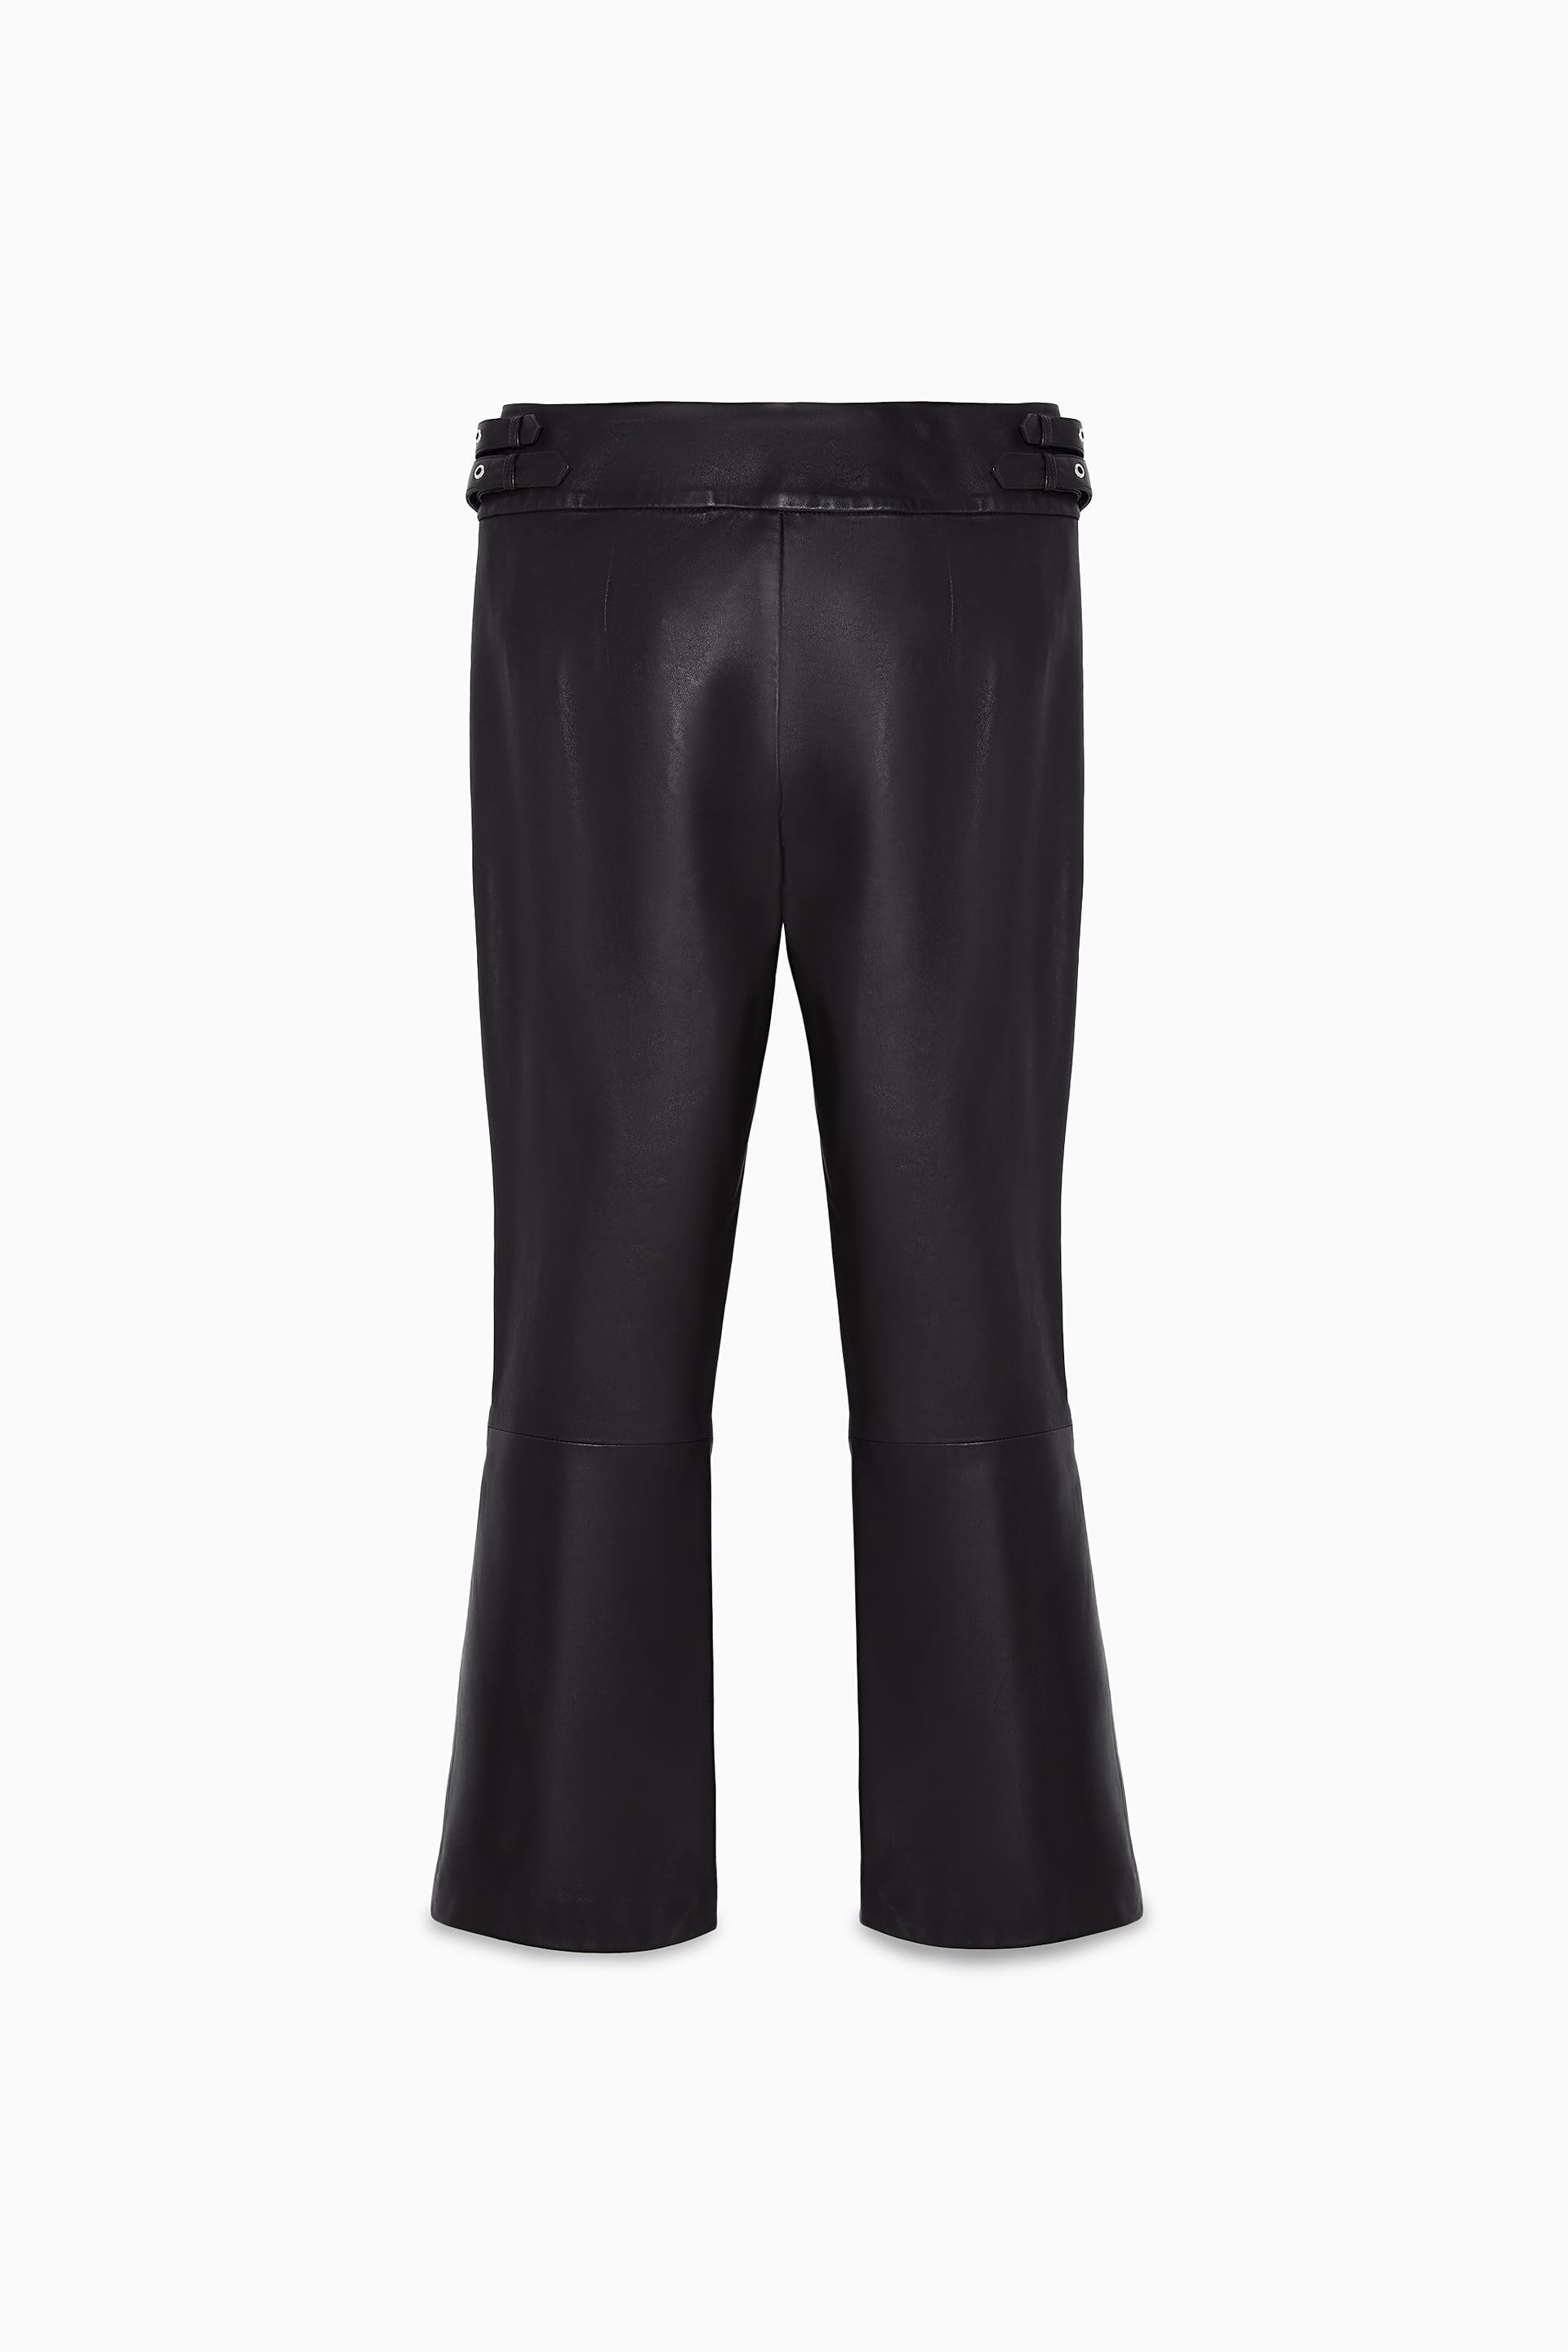 Zara LIMITED EDITION LEATHER TROUSERS - 79374733-800-